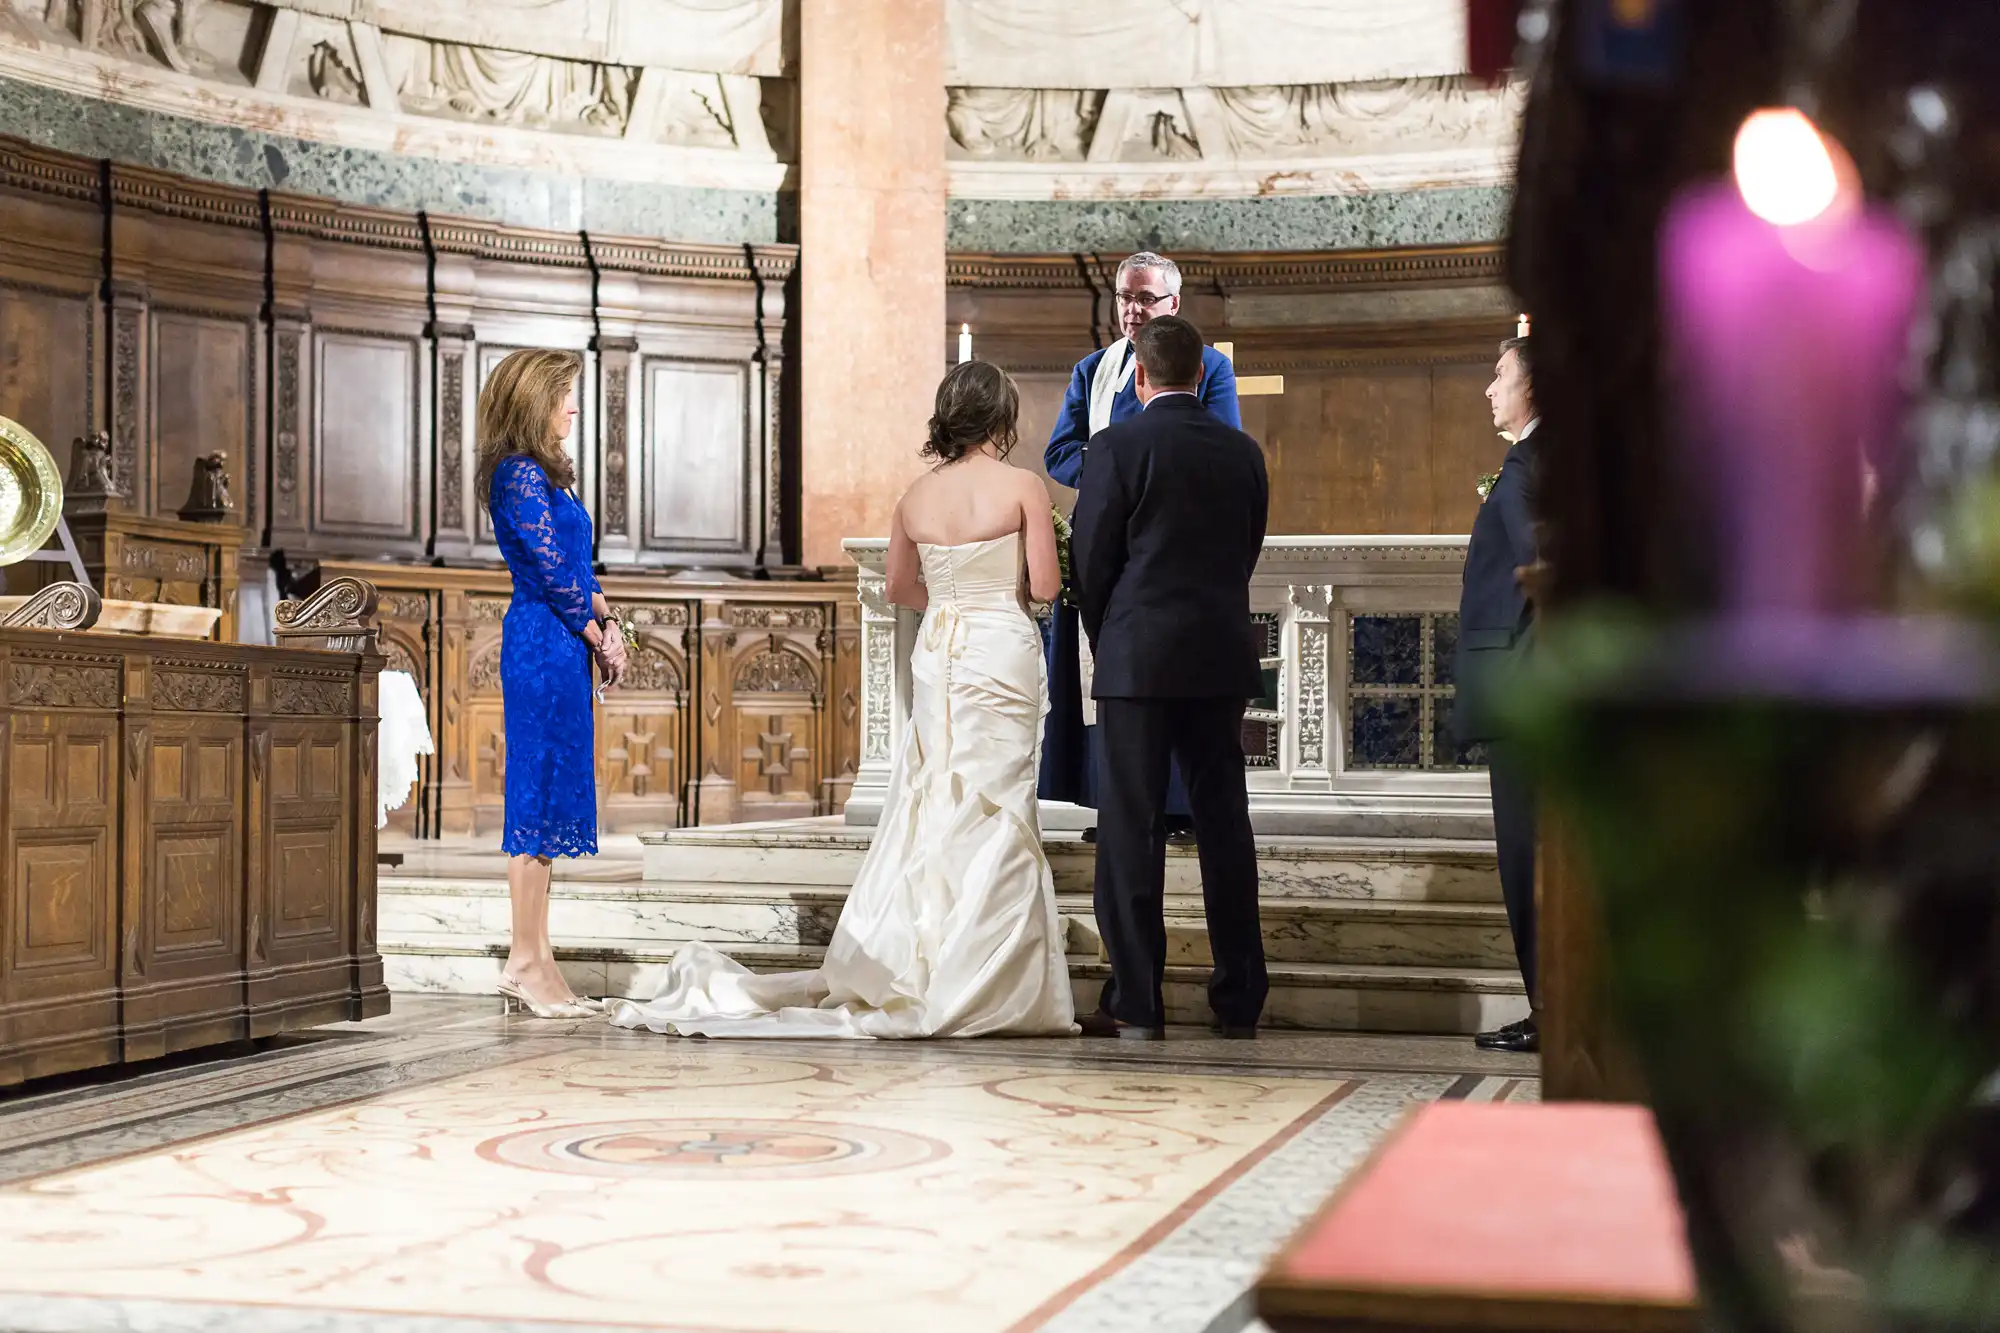 A wedding ceremony in a grand, ornate interior with a couple facing an officiant, flanked by a woman in a blue dress.